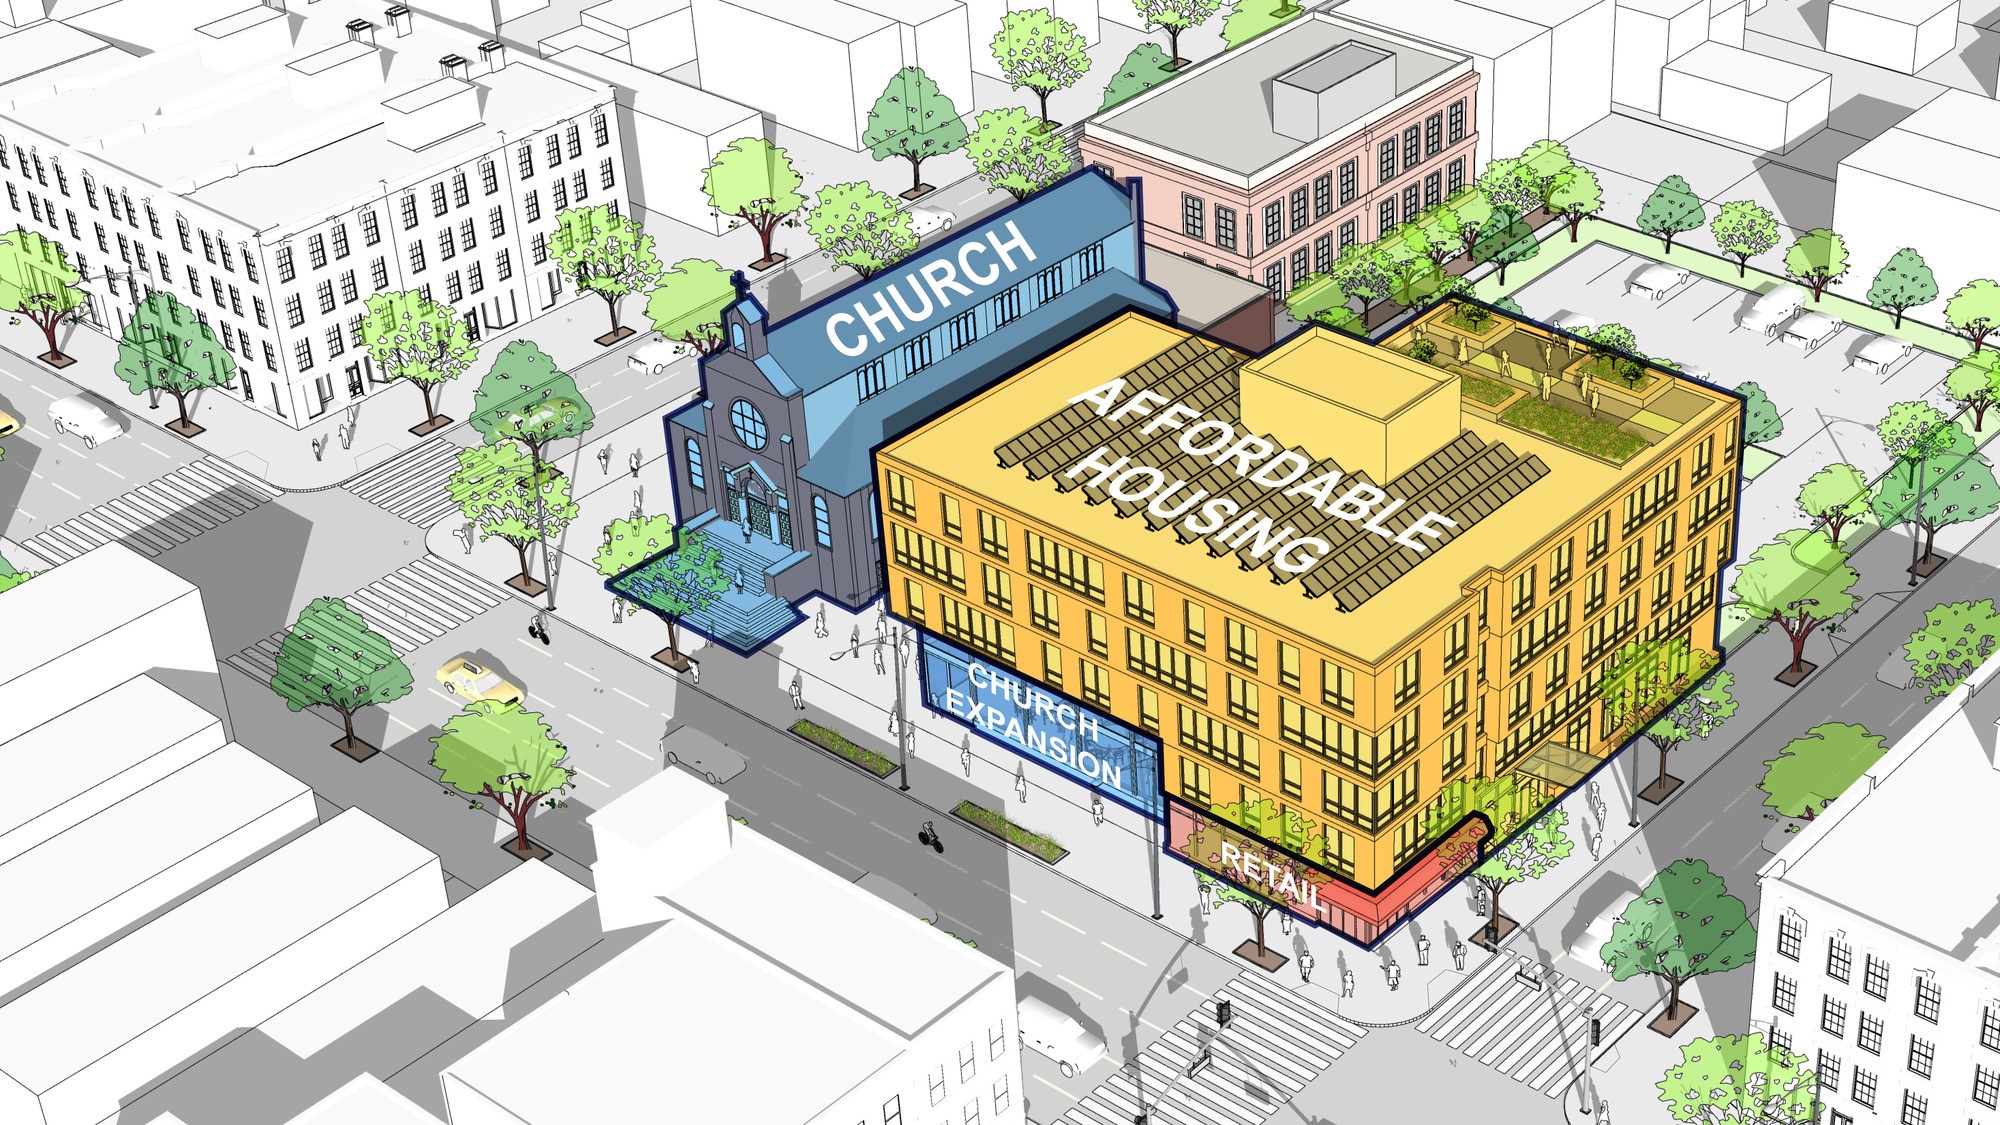 Demonstration of maximizing space on campuses to create new housing and support community revitalization. Credit: New York City Department of City Planning